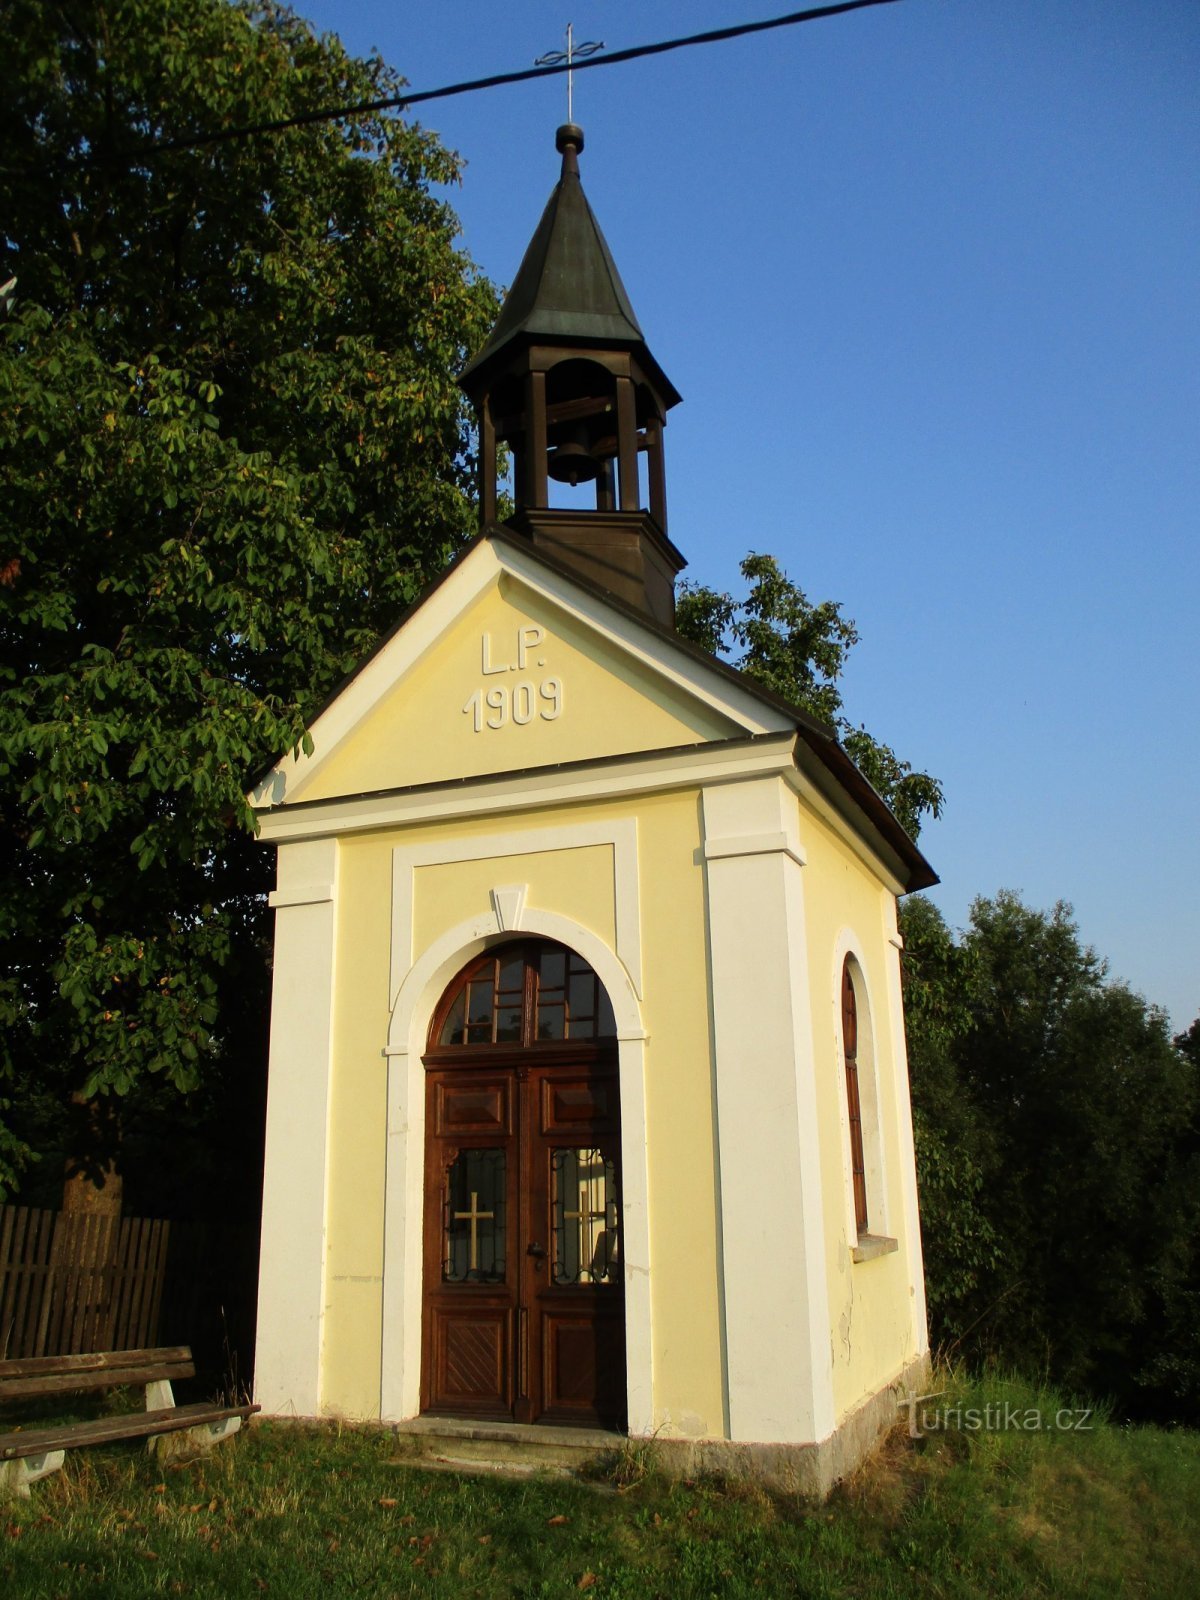 Chapel of the Assumption of the Virgin Mary (Mečov)